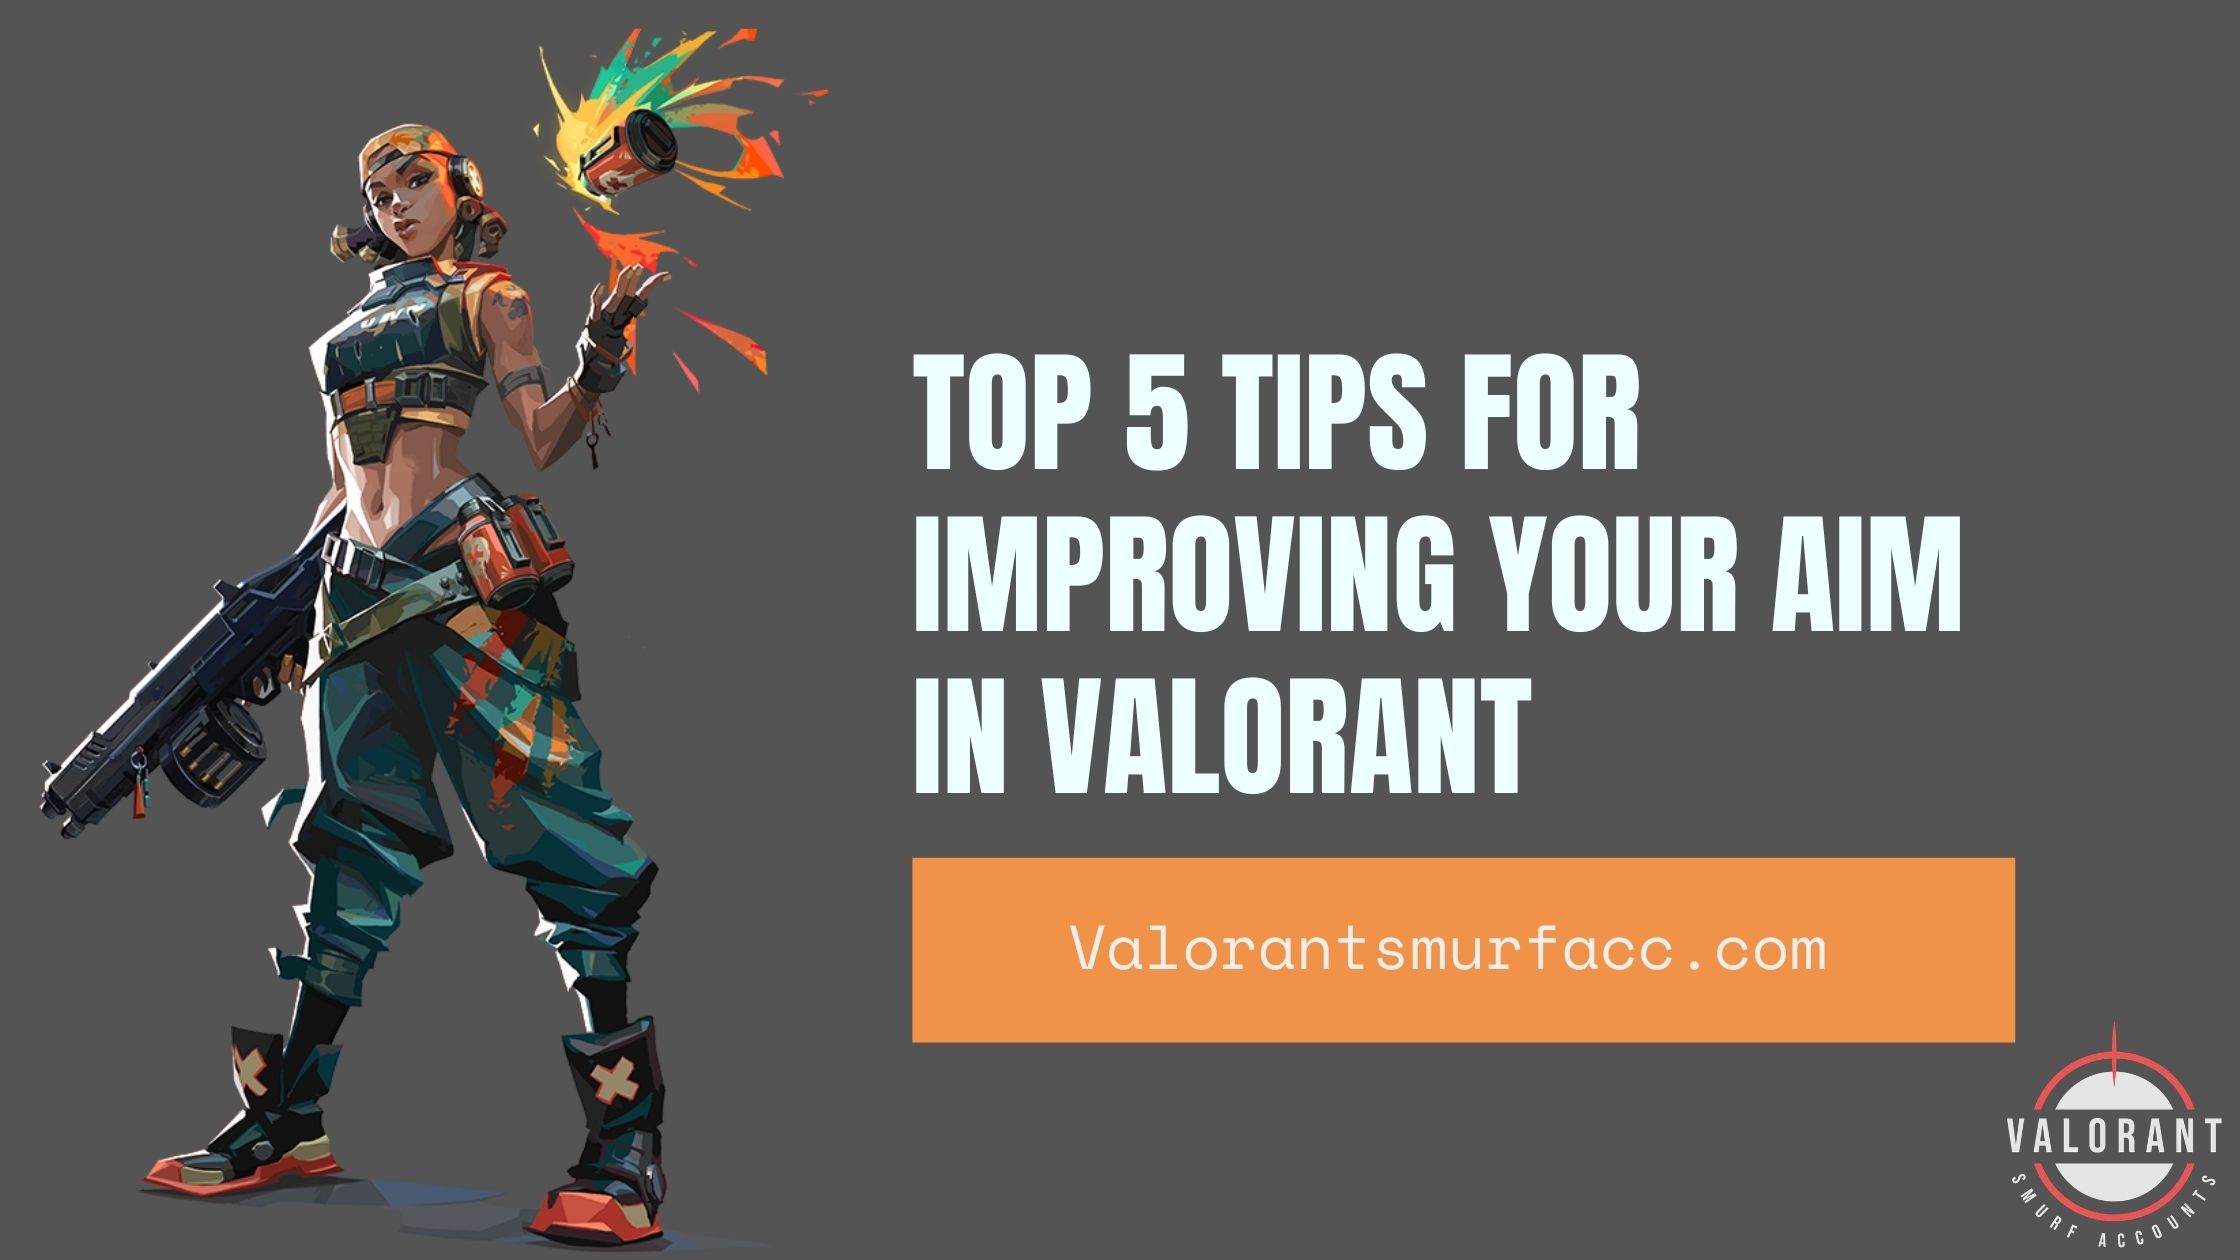 Top 5 tips for improving your aim in Valorant